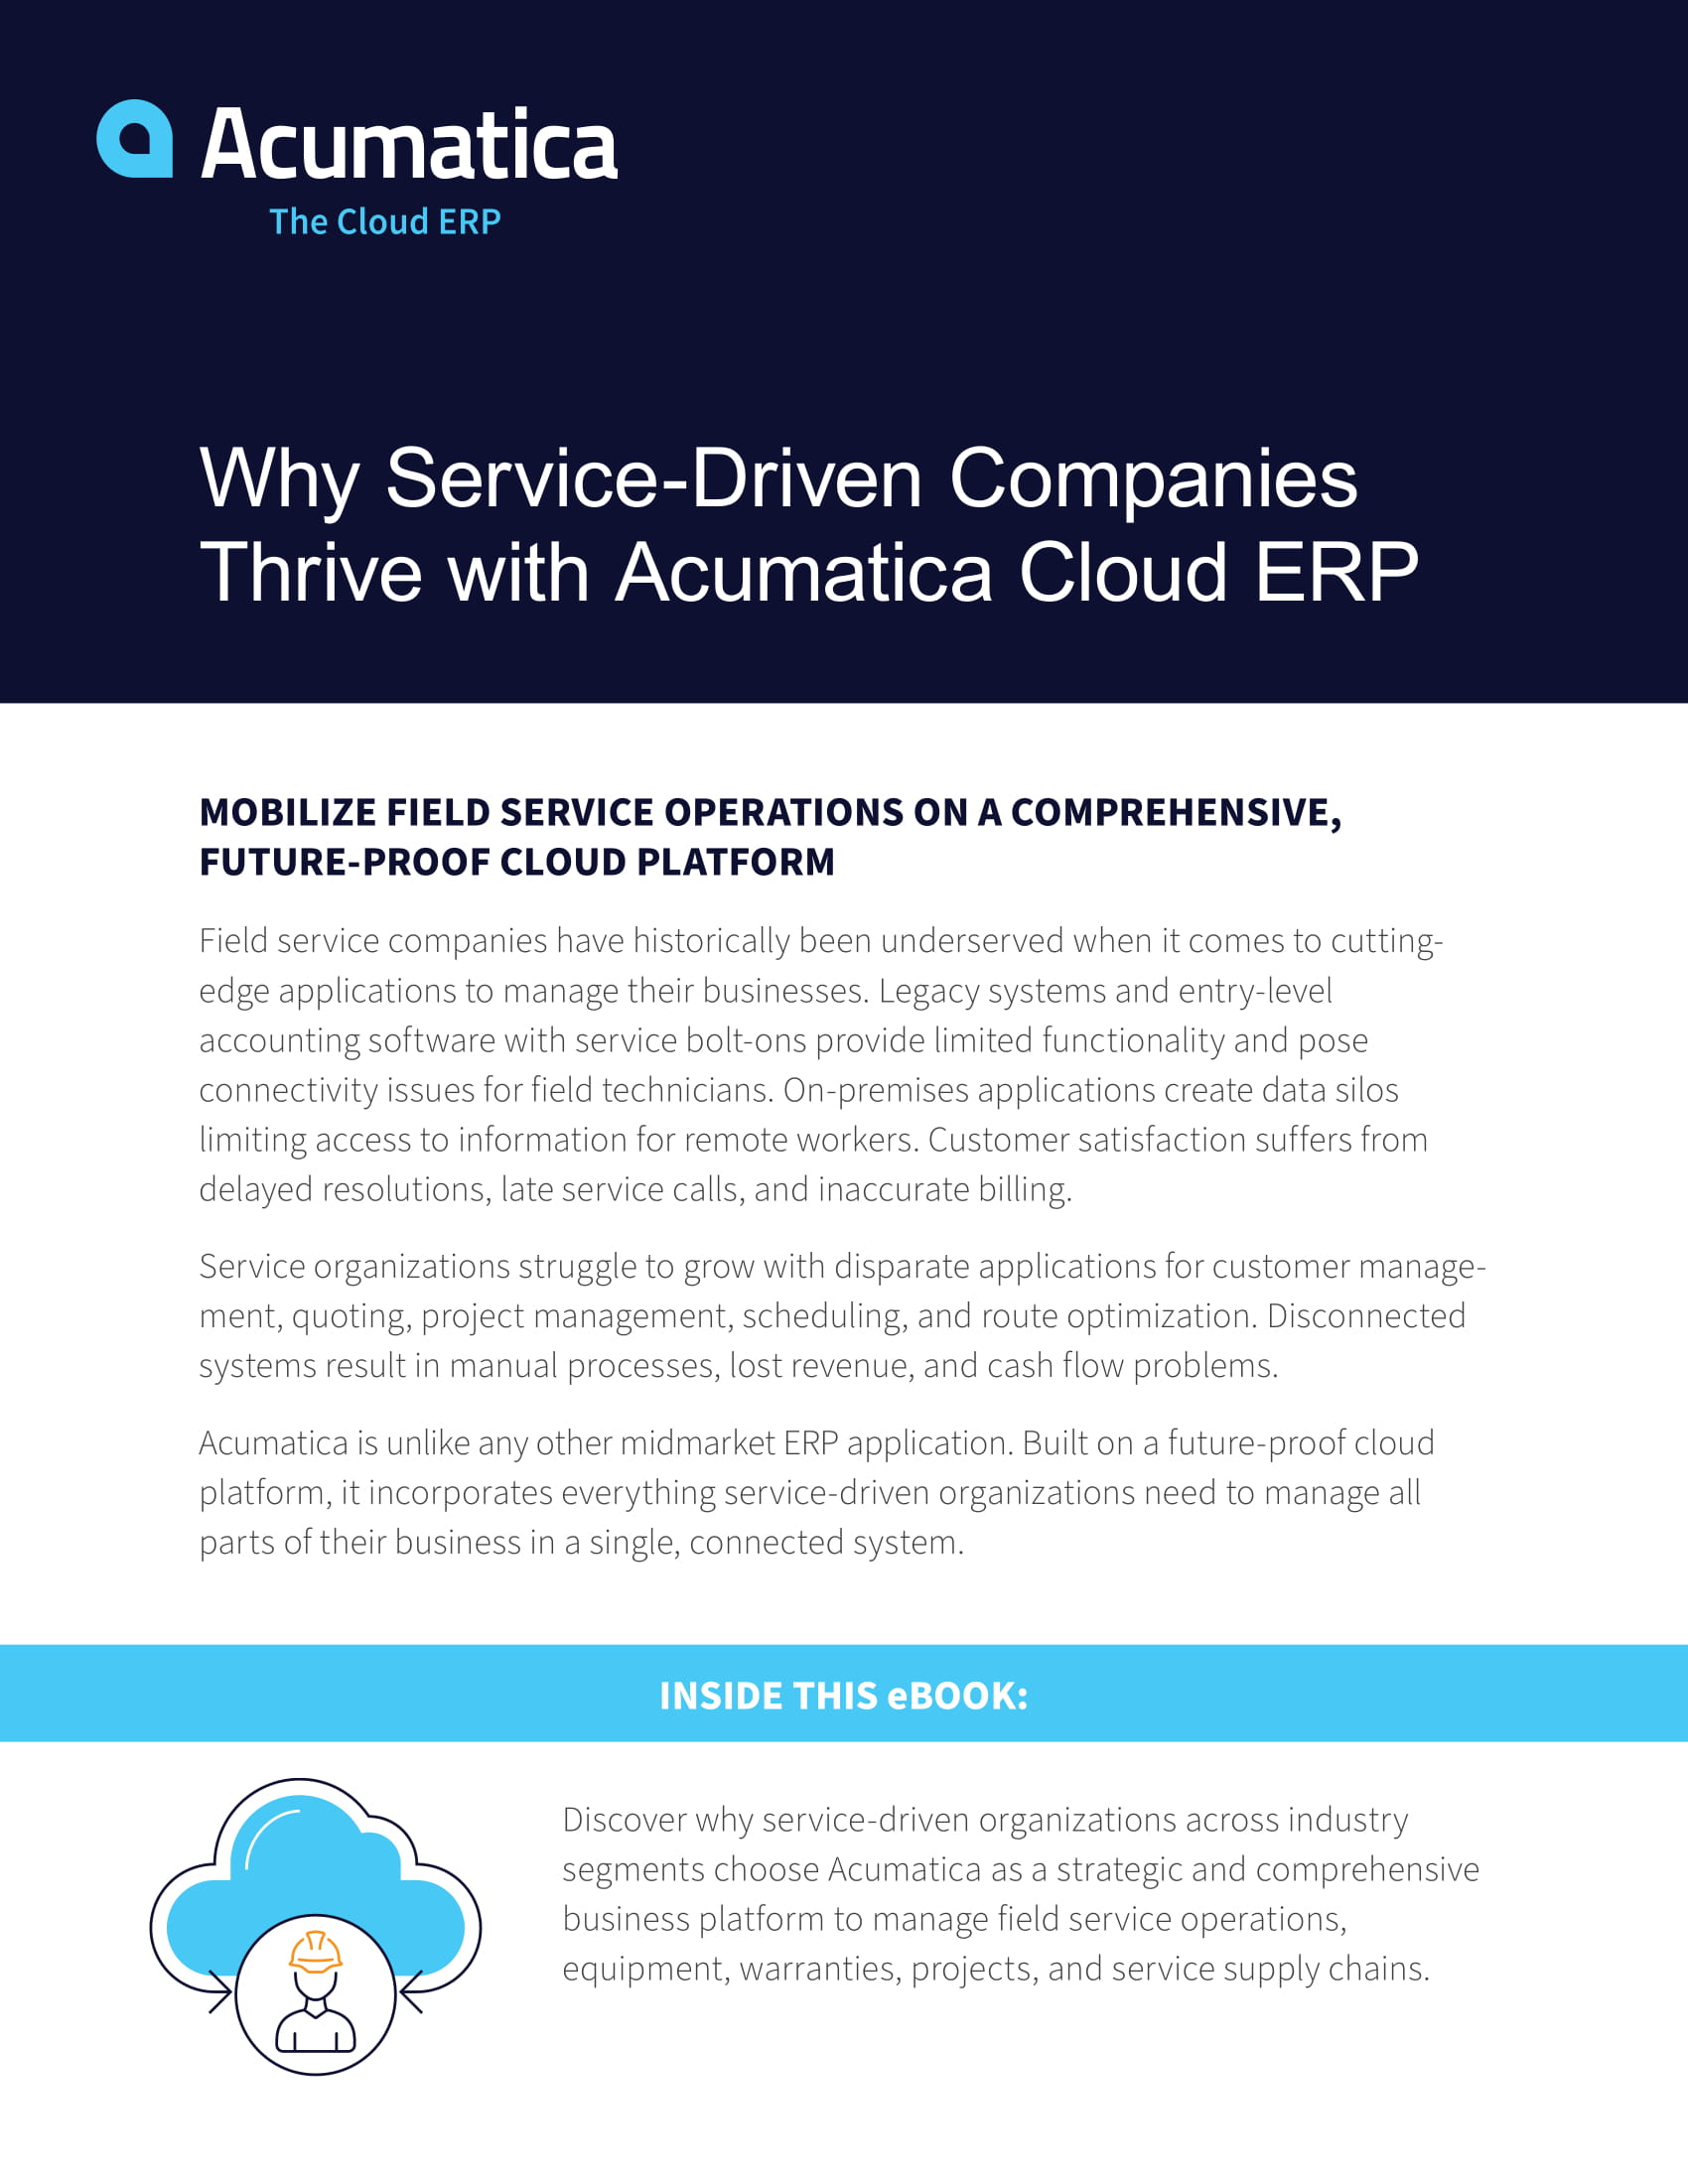 Why Service-Driven Companies Thrive with Acumatica Cloud ERP